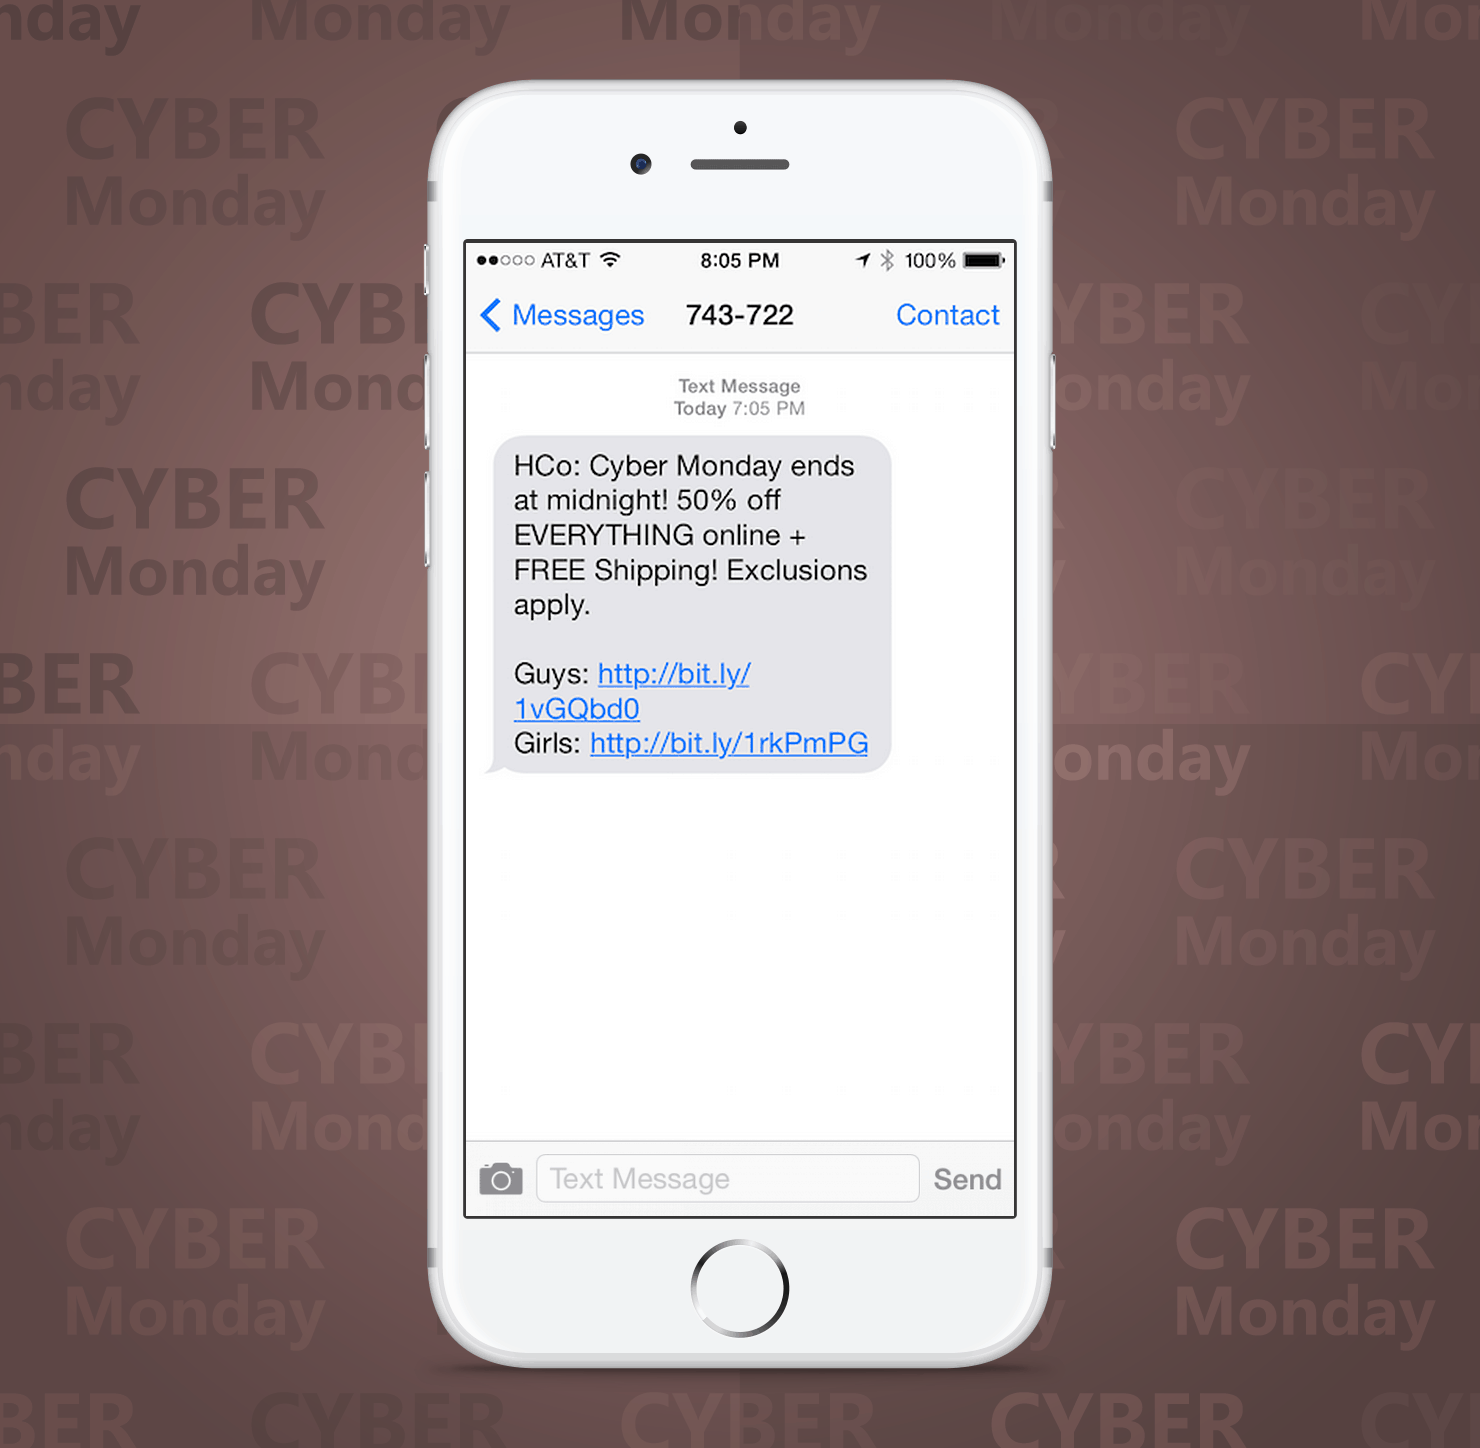 SMS Coupon Example Sent on Cyber Monday From Hollister Retail Stores to Customers